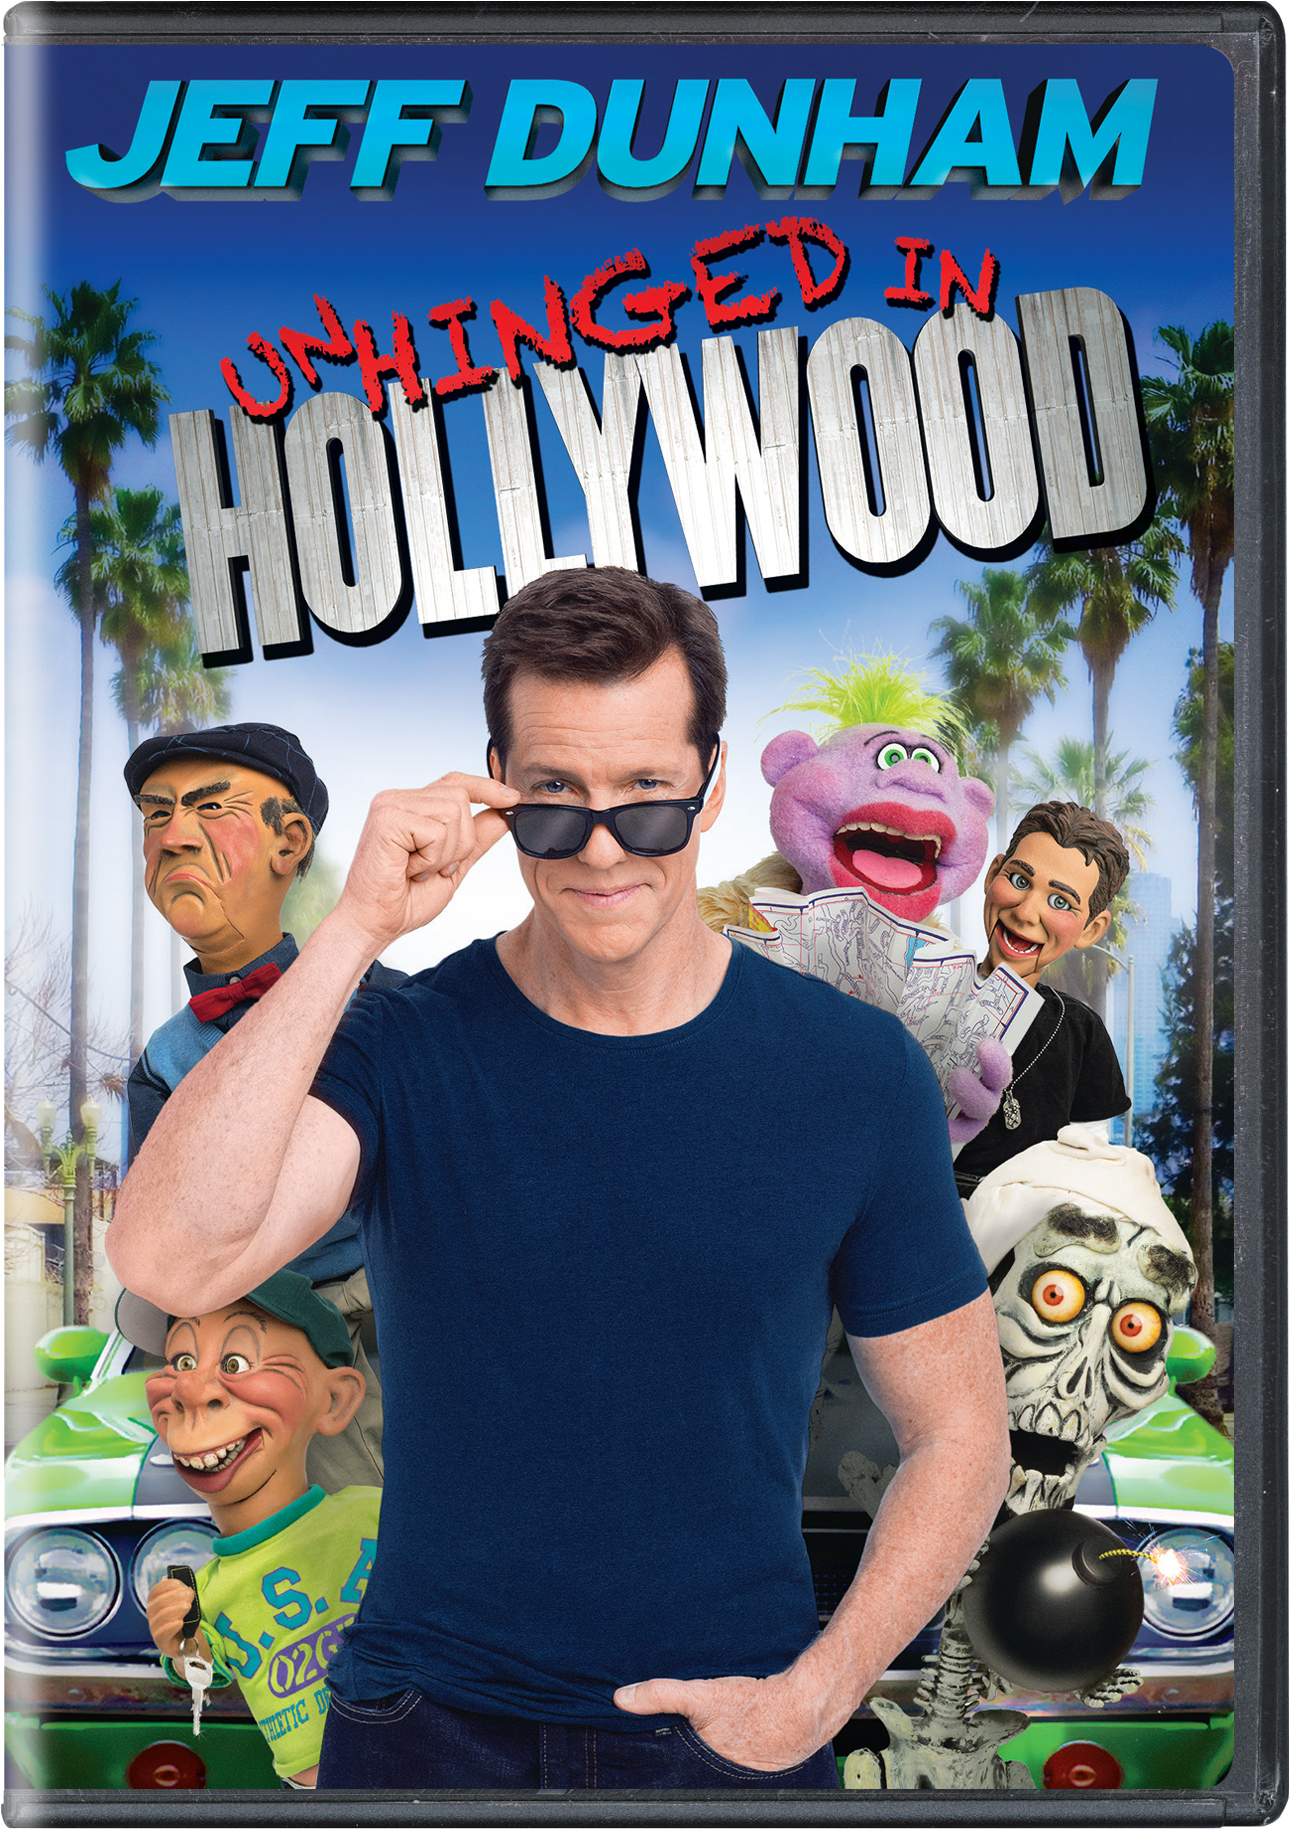 Jeff Dunham: Unhinged In Hollywood - DVD [ 2015 ]  - Comedy Movies On DVD - Movies On GRUV